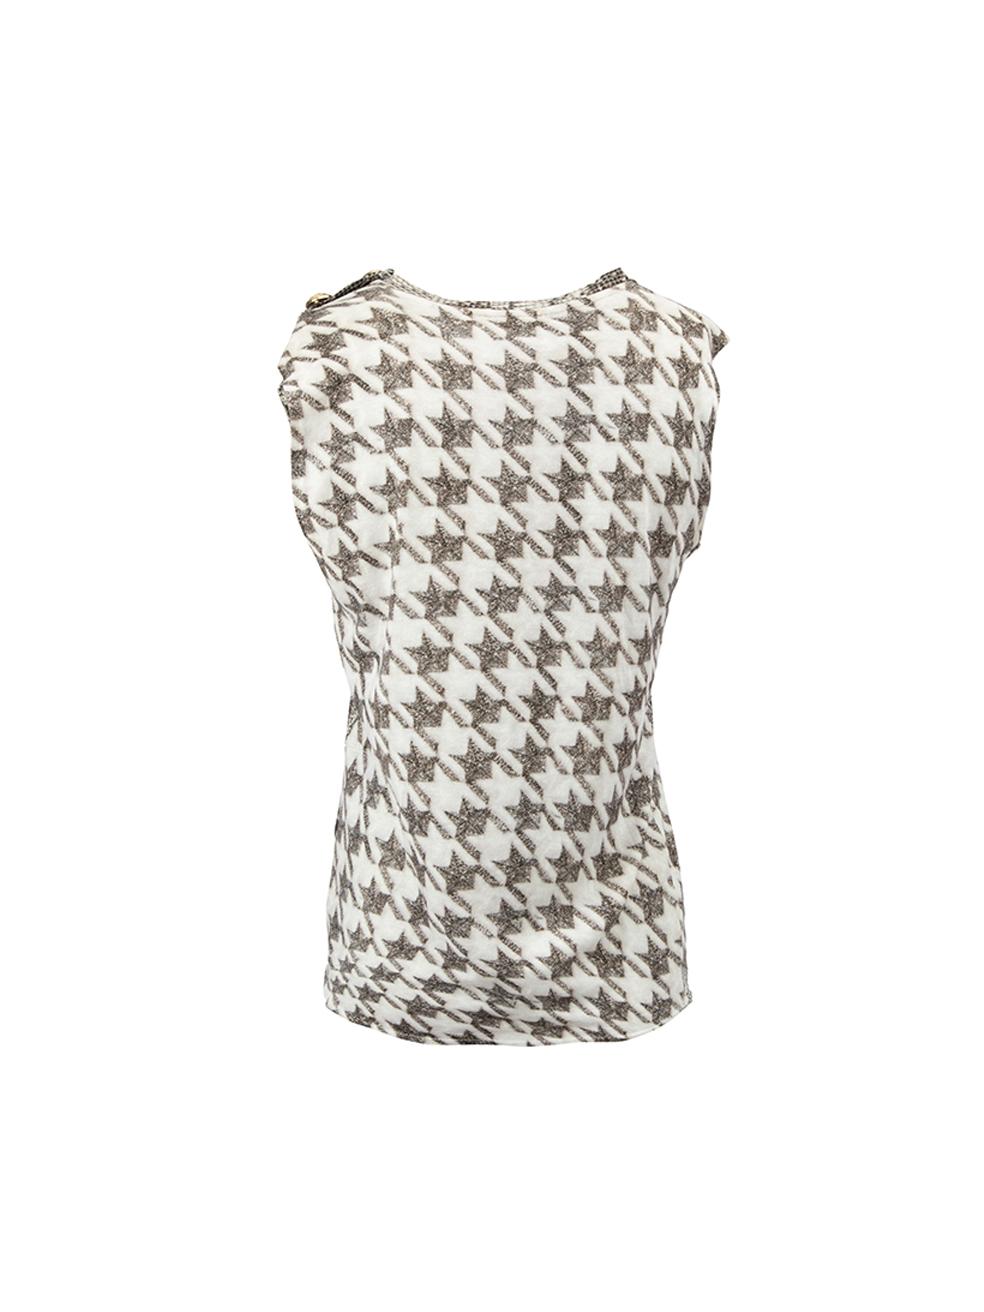 Grey Houndstooth & Jewel Print Top Size S In Good Condition For Sale In London, GB